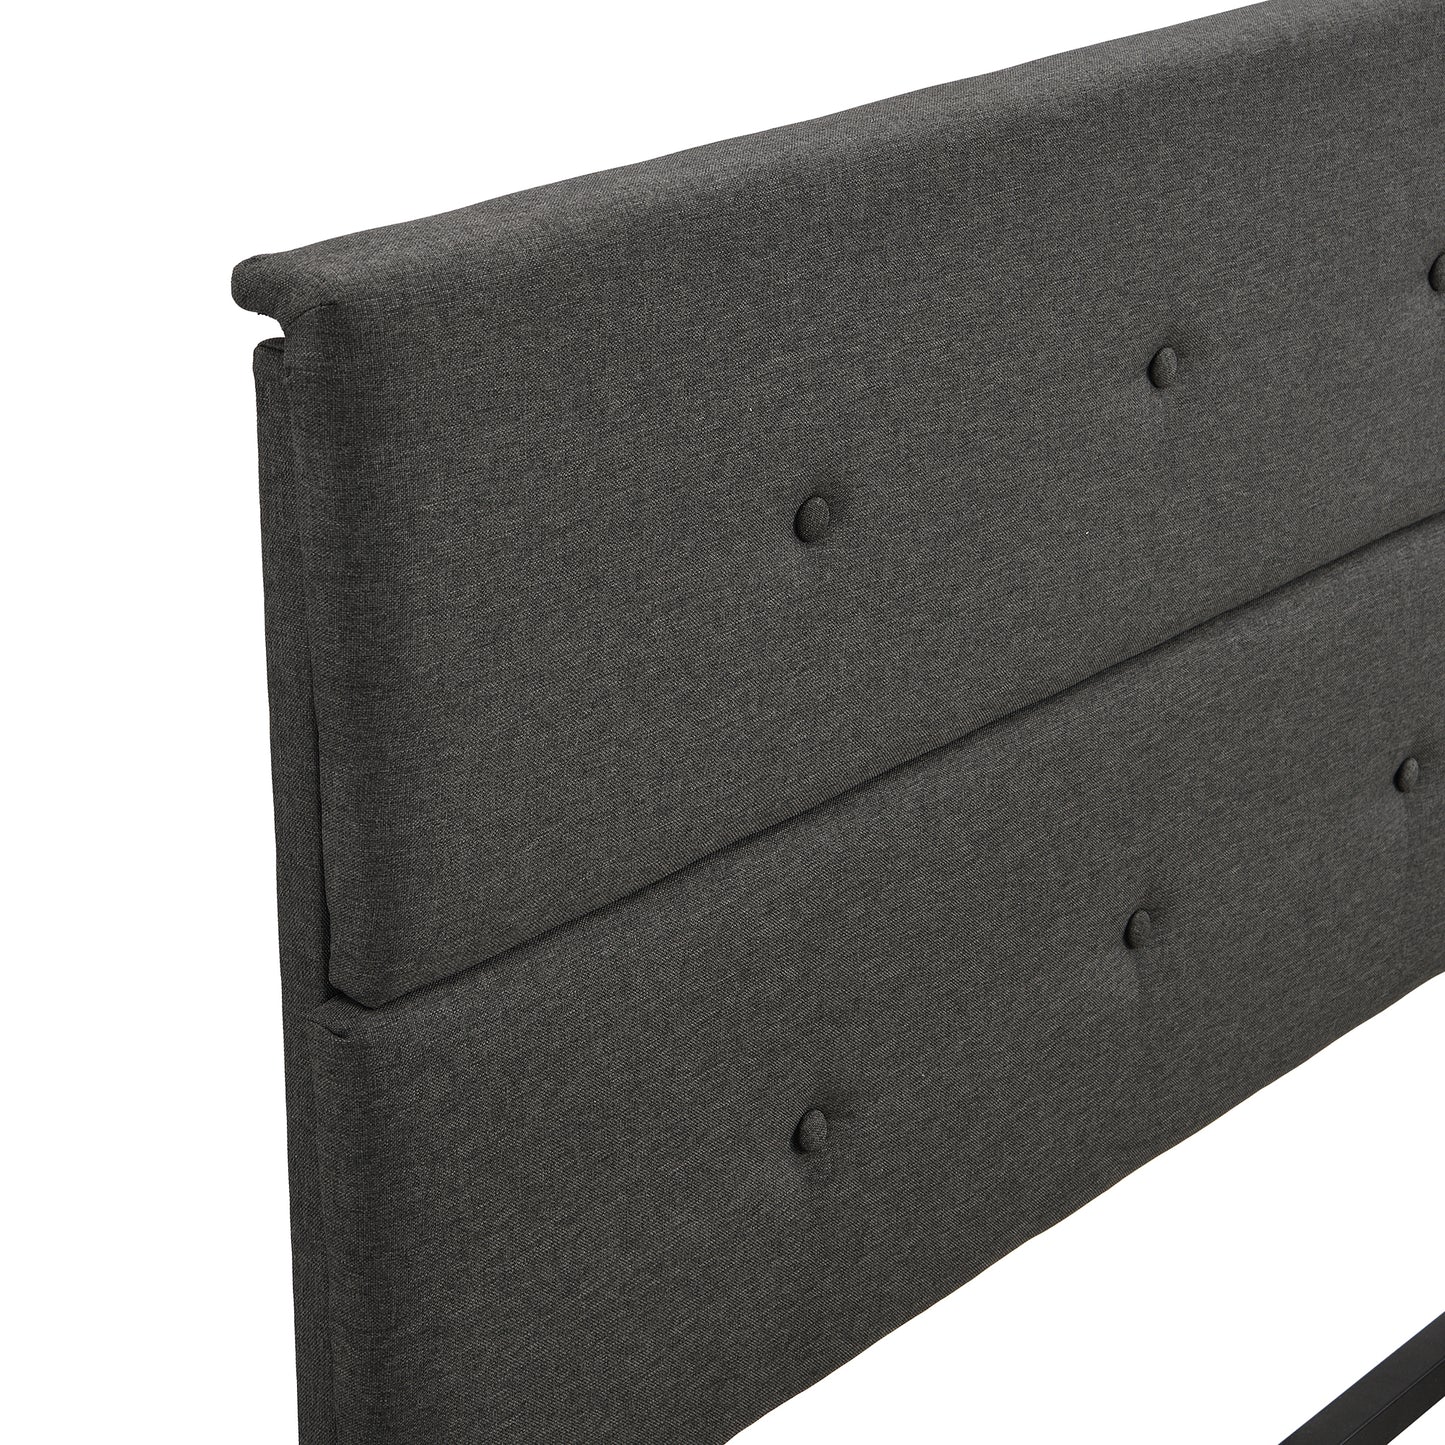 Upholstered Platform Bed with Underneath Storage,Full Size,Gray